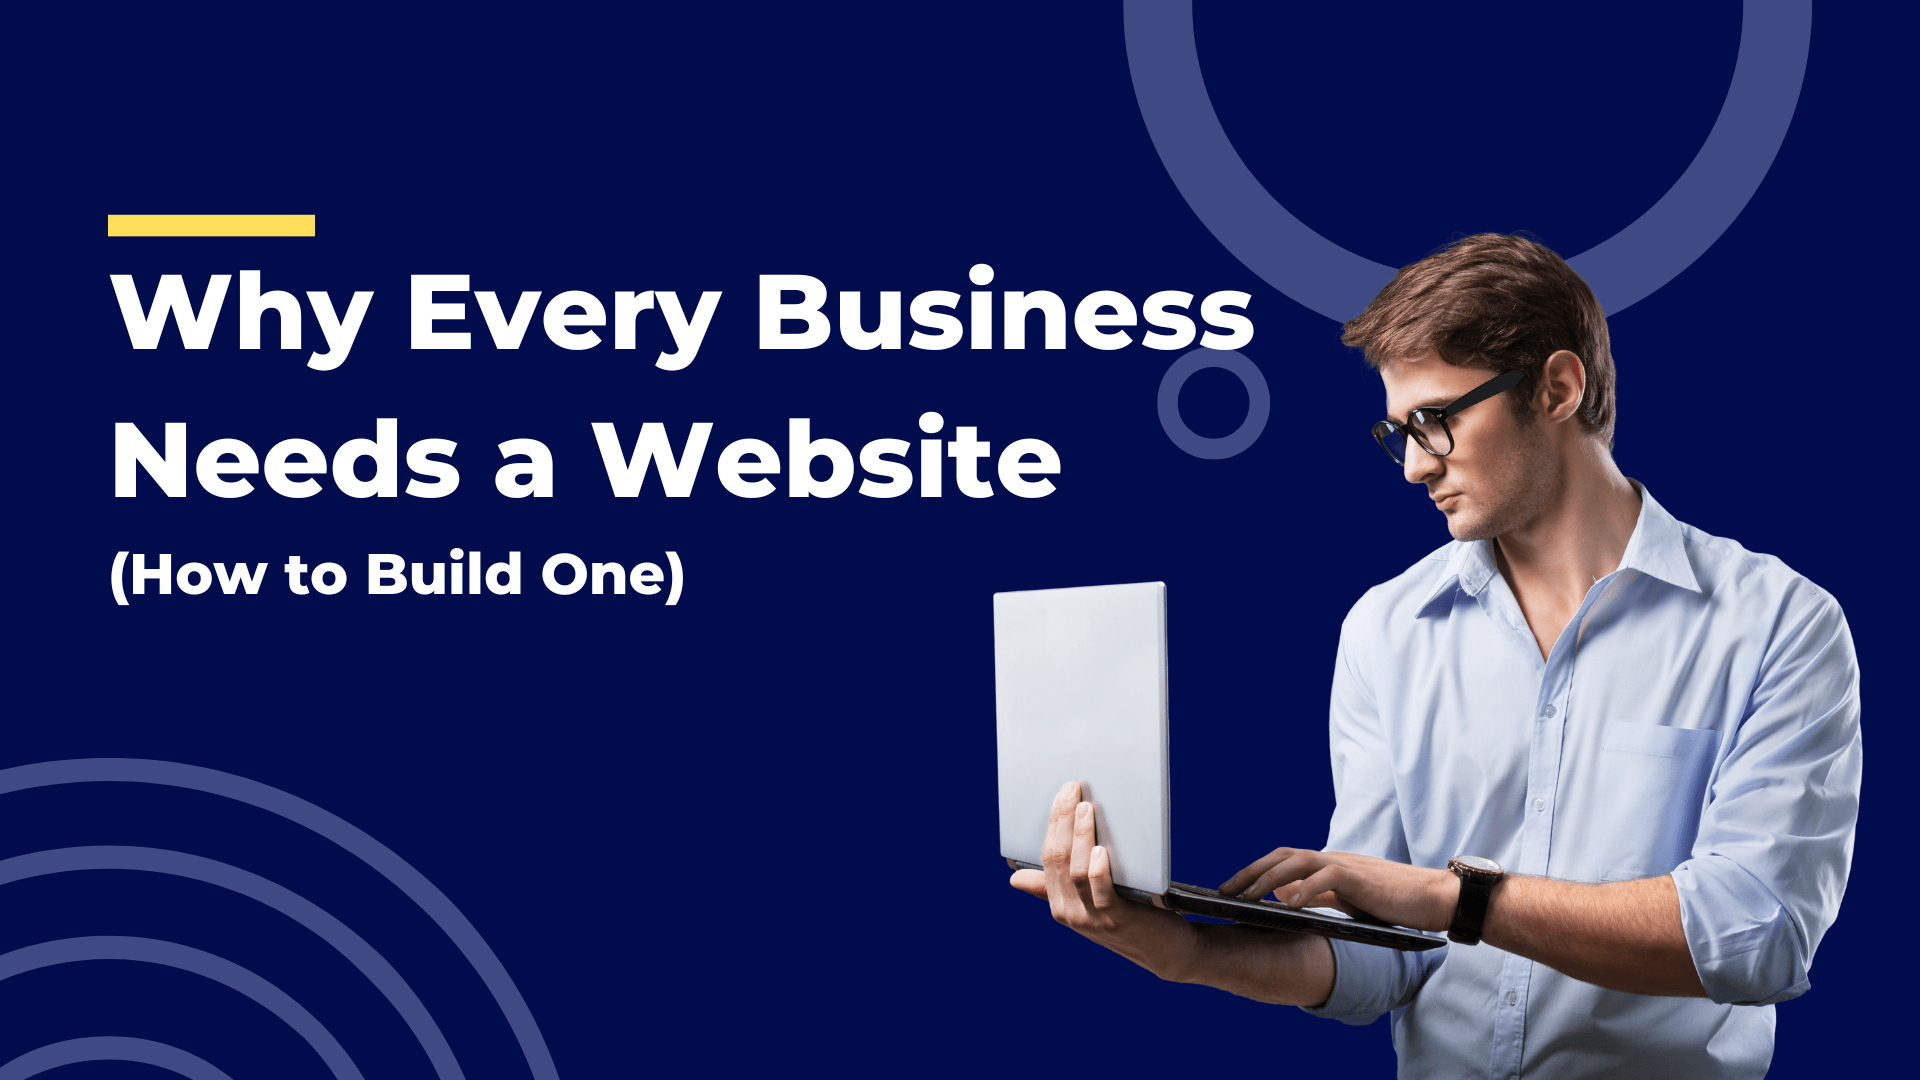 Why Every Business Needs a Website (and How to Build One)